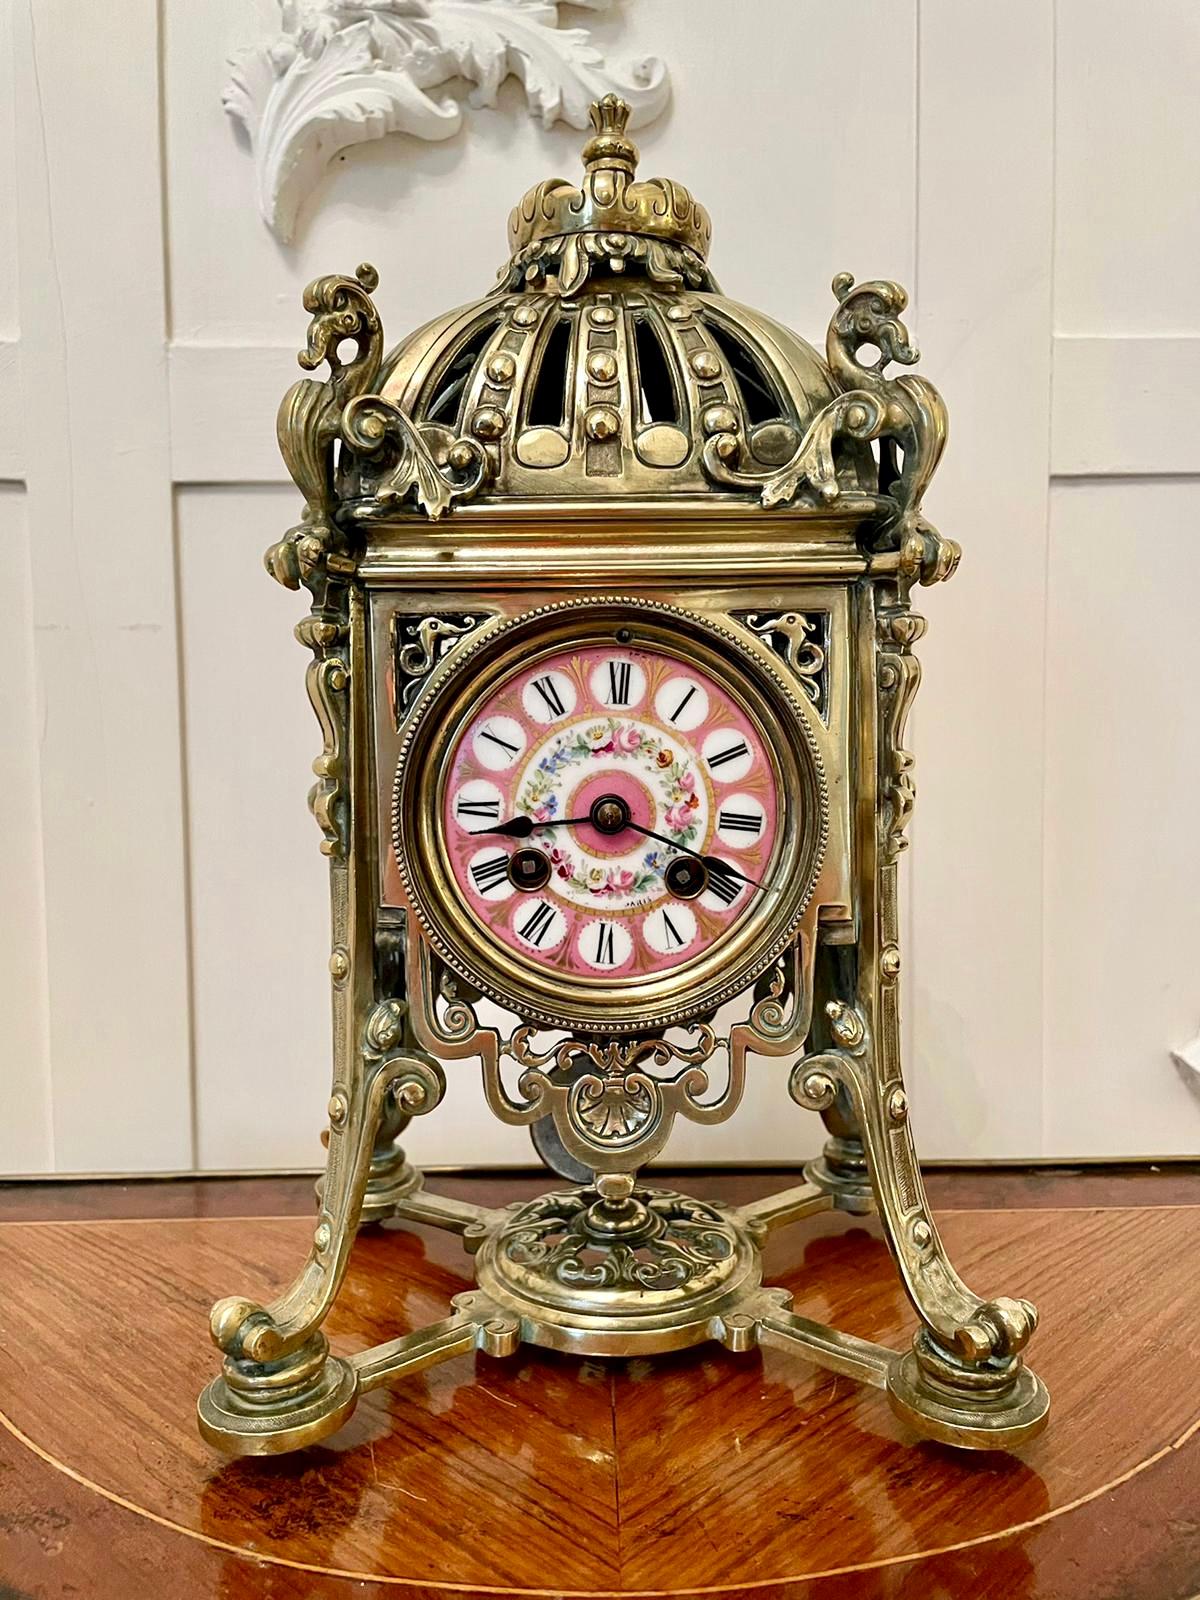 An outstanding antique 19th century French eight day brass gilt metal striking mantel clock by the premier makers of Paris, Henry Marcs and Japy Freres. The pink porcelain dial is an exquisite example depicting a beautiful wreath of pretty flowers